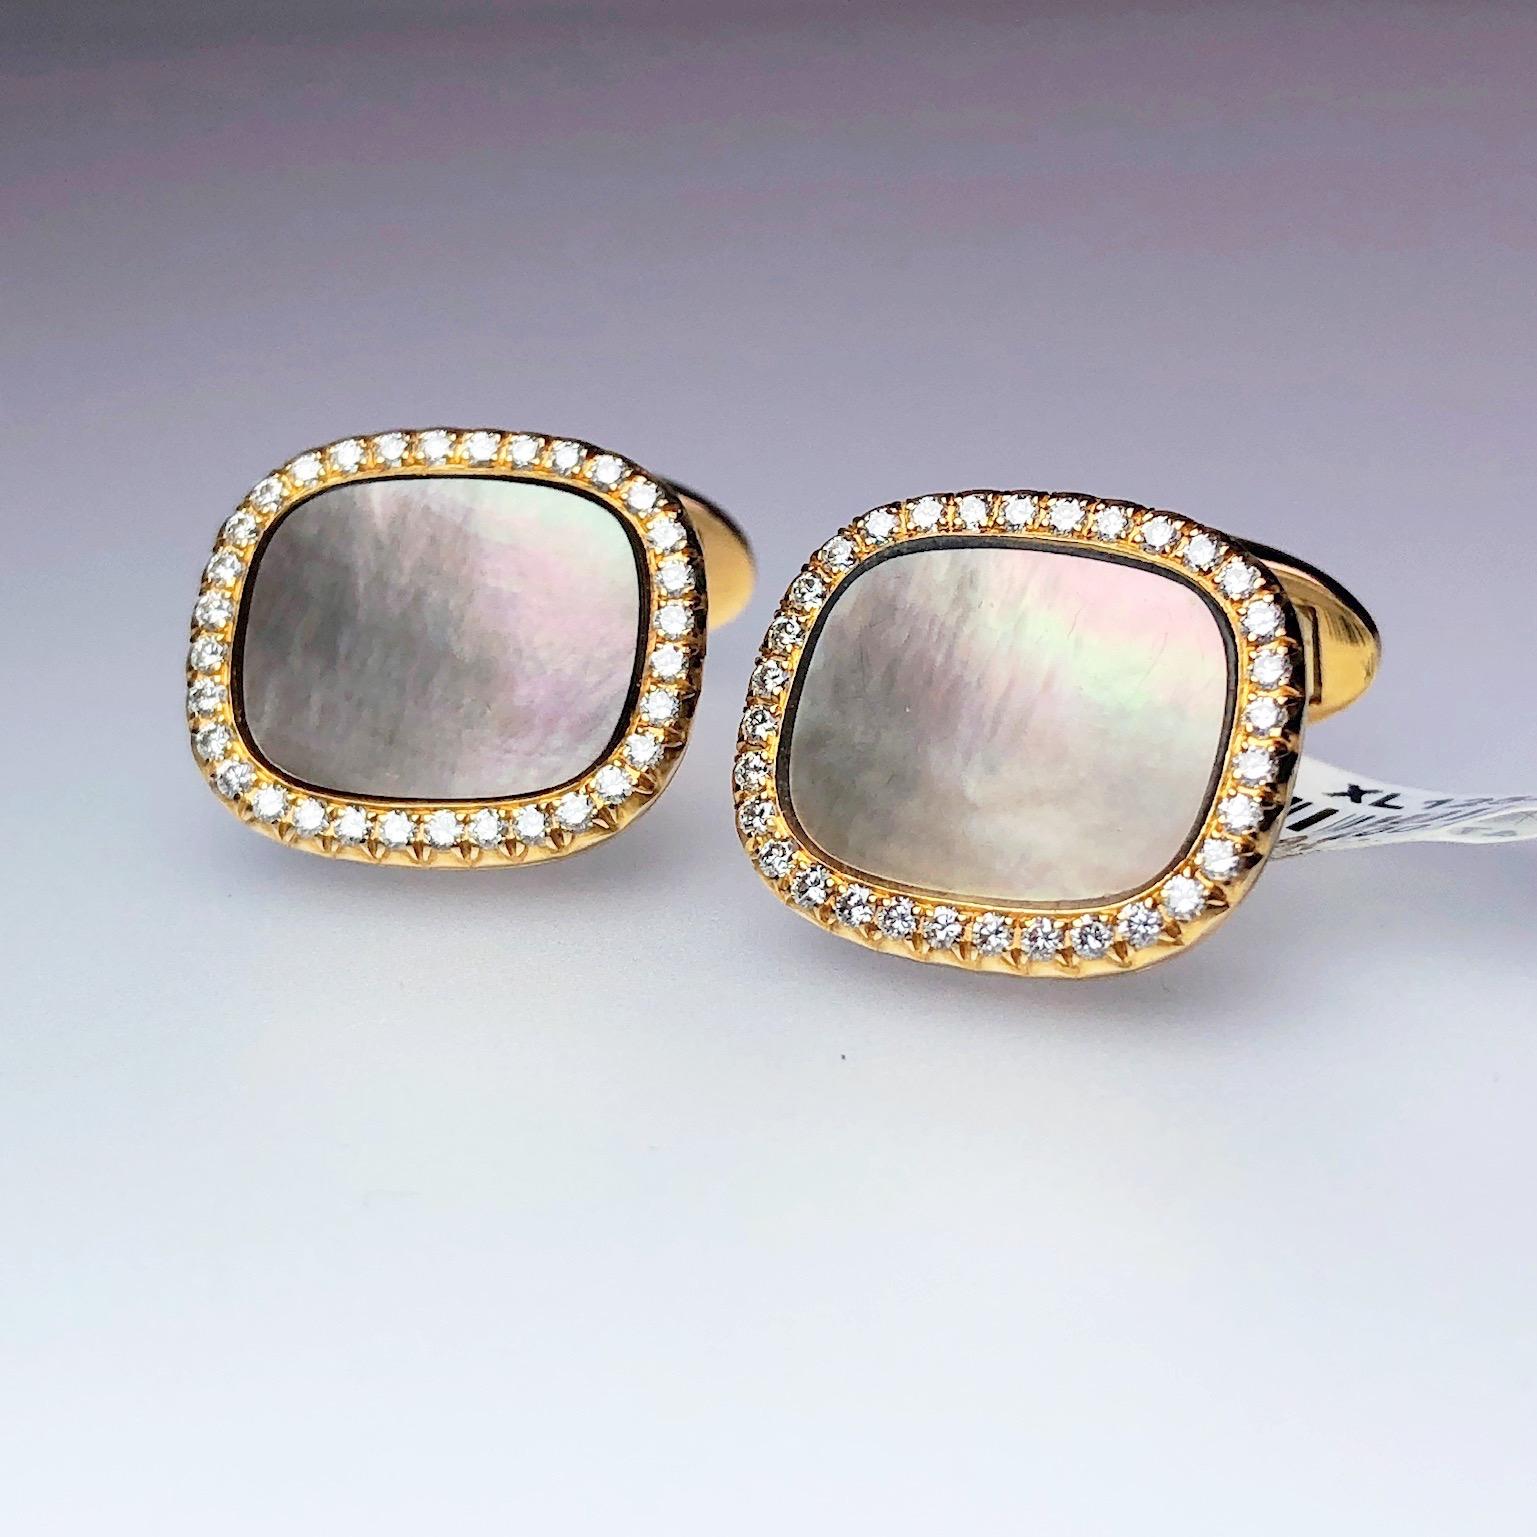 Elegant 18 karat rose gold cushion shaped cufflinks. The cufflinks are set with Tahitian Mother of Pearl which is a greyish color with a pink cast. The cufflinks are trimmed with a single row of round brilliant diamonds. They measure 7/8